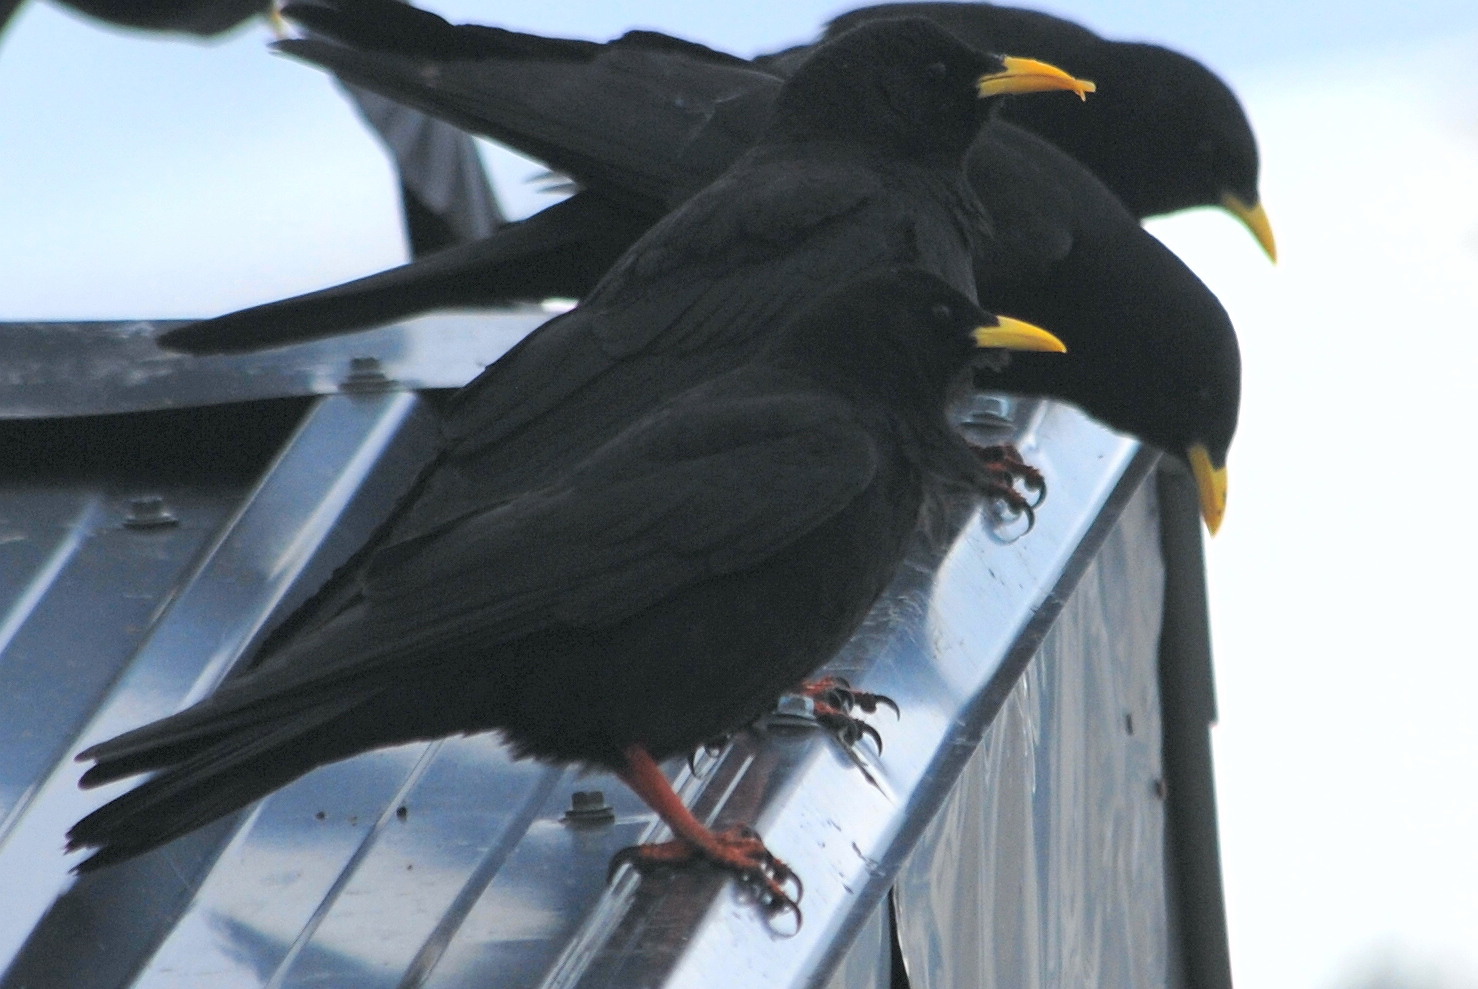 Click picture to see more Alpine Choughs.